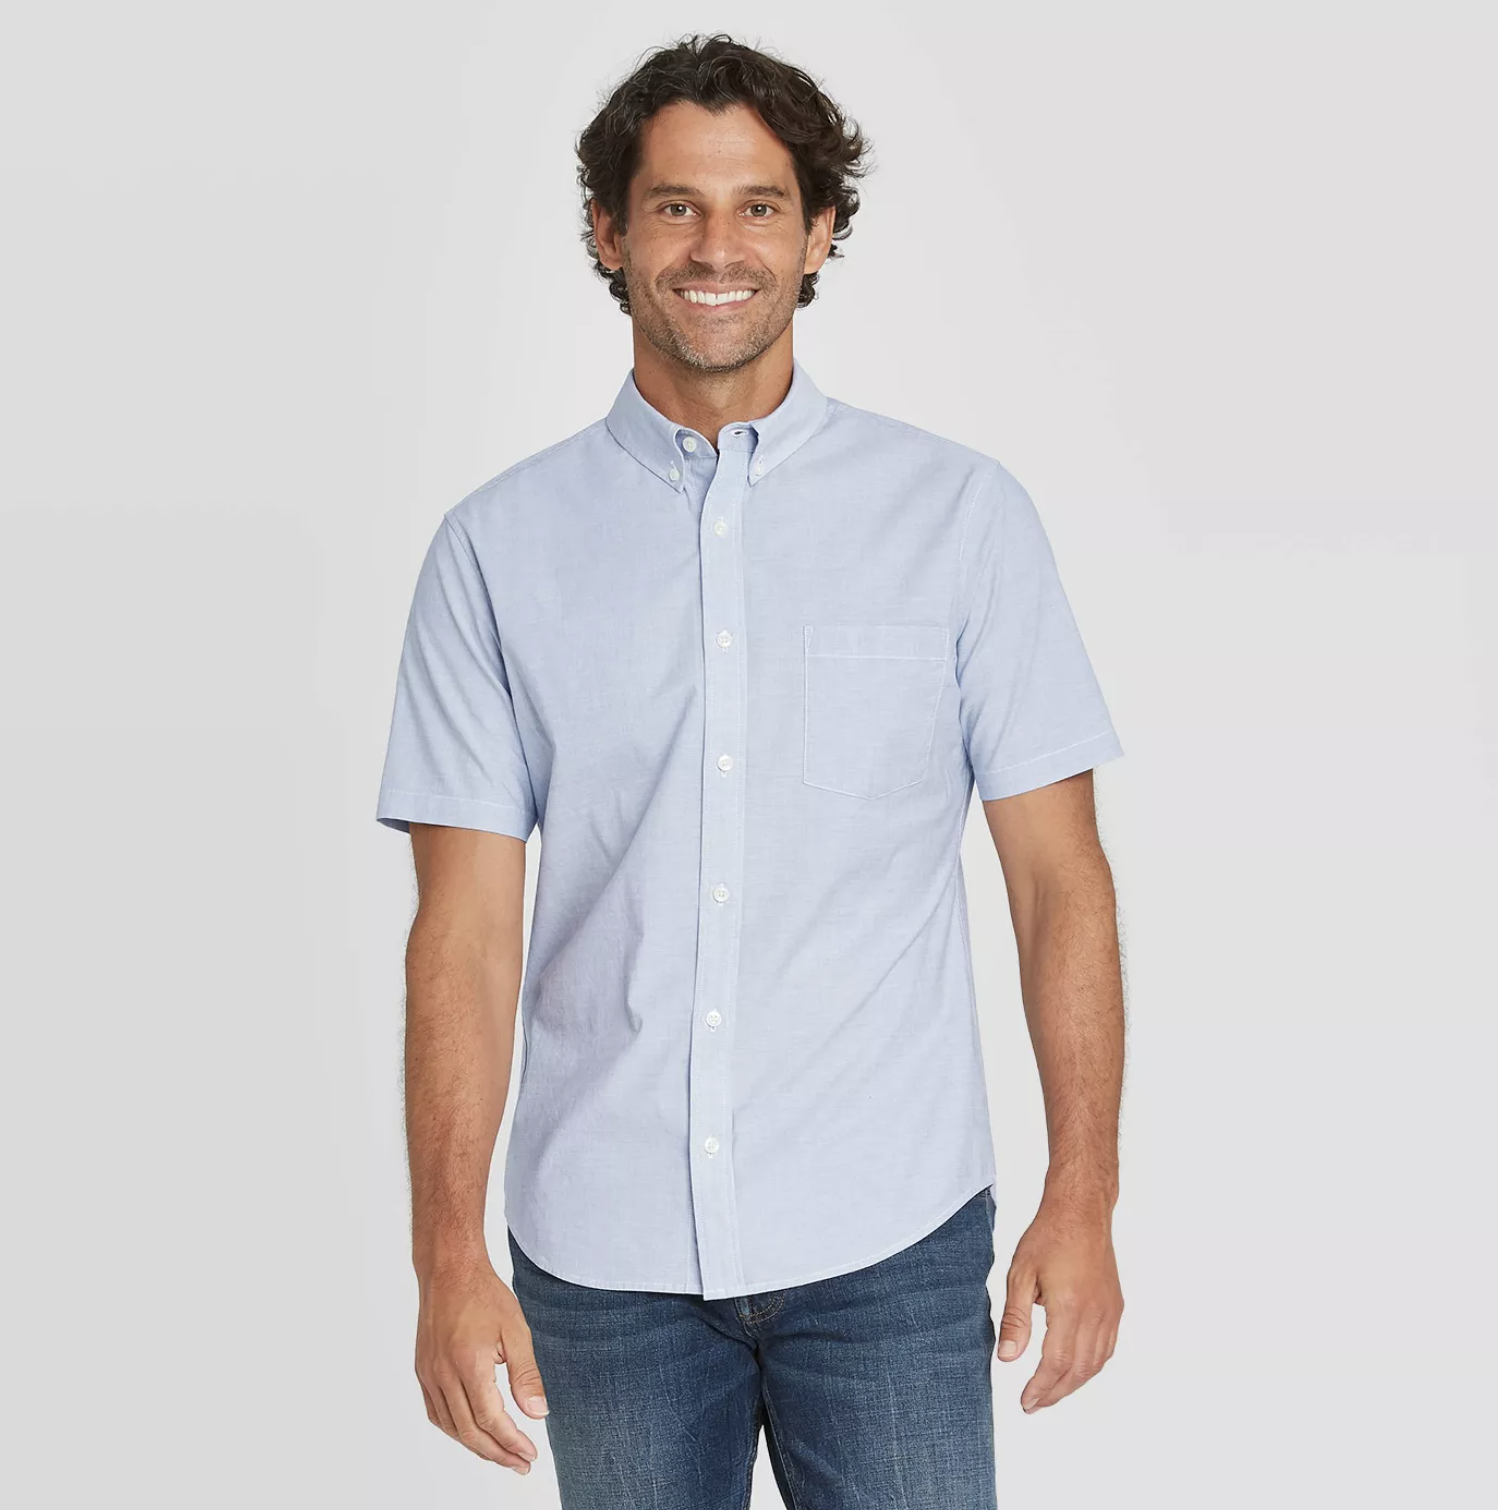 model wearing the button up shirt in blue